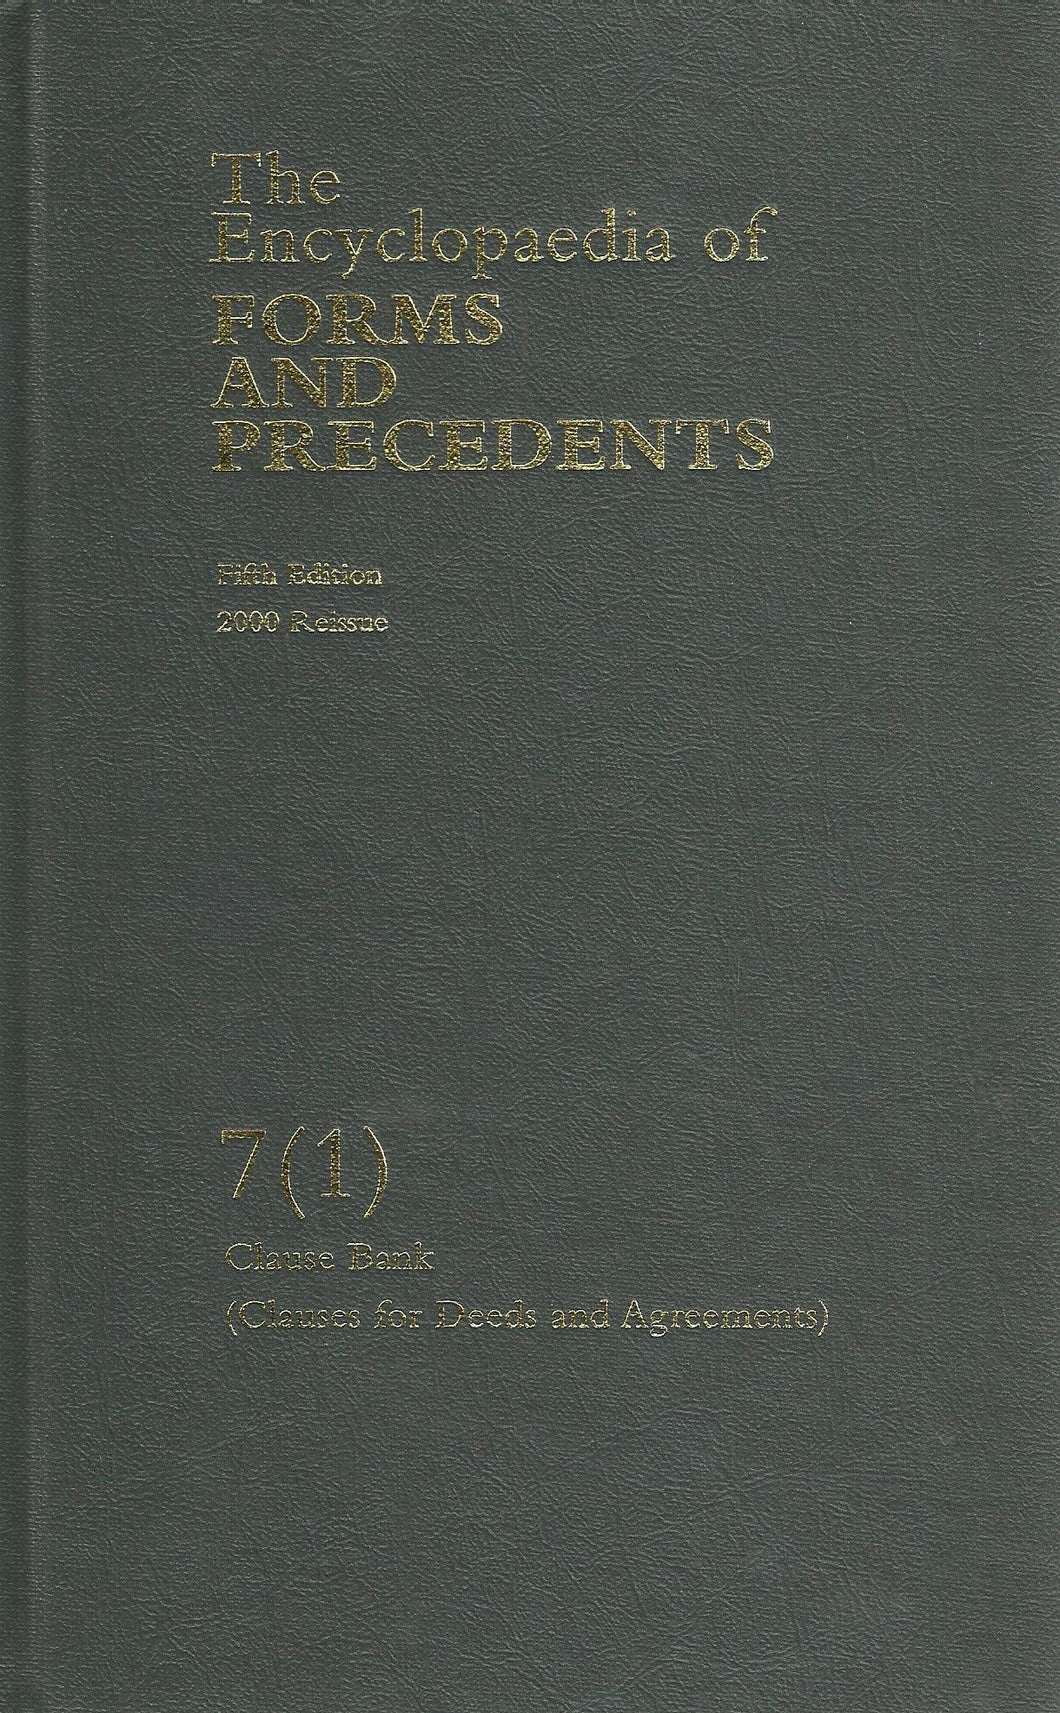 Encyclopadia of Forms and Precendents: Vol 7(1)